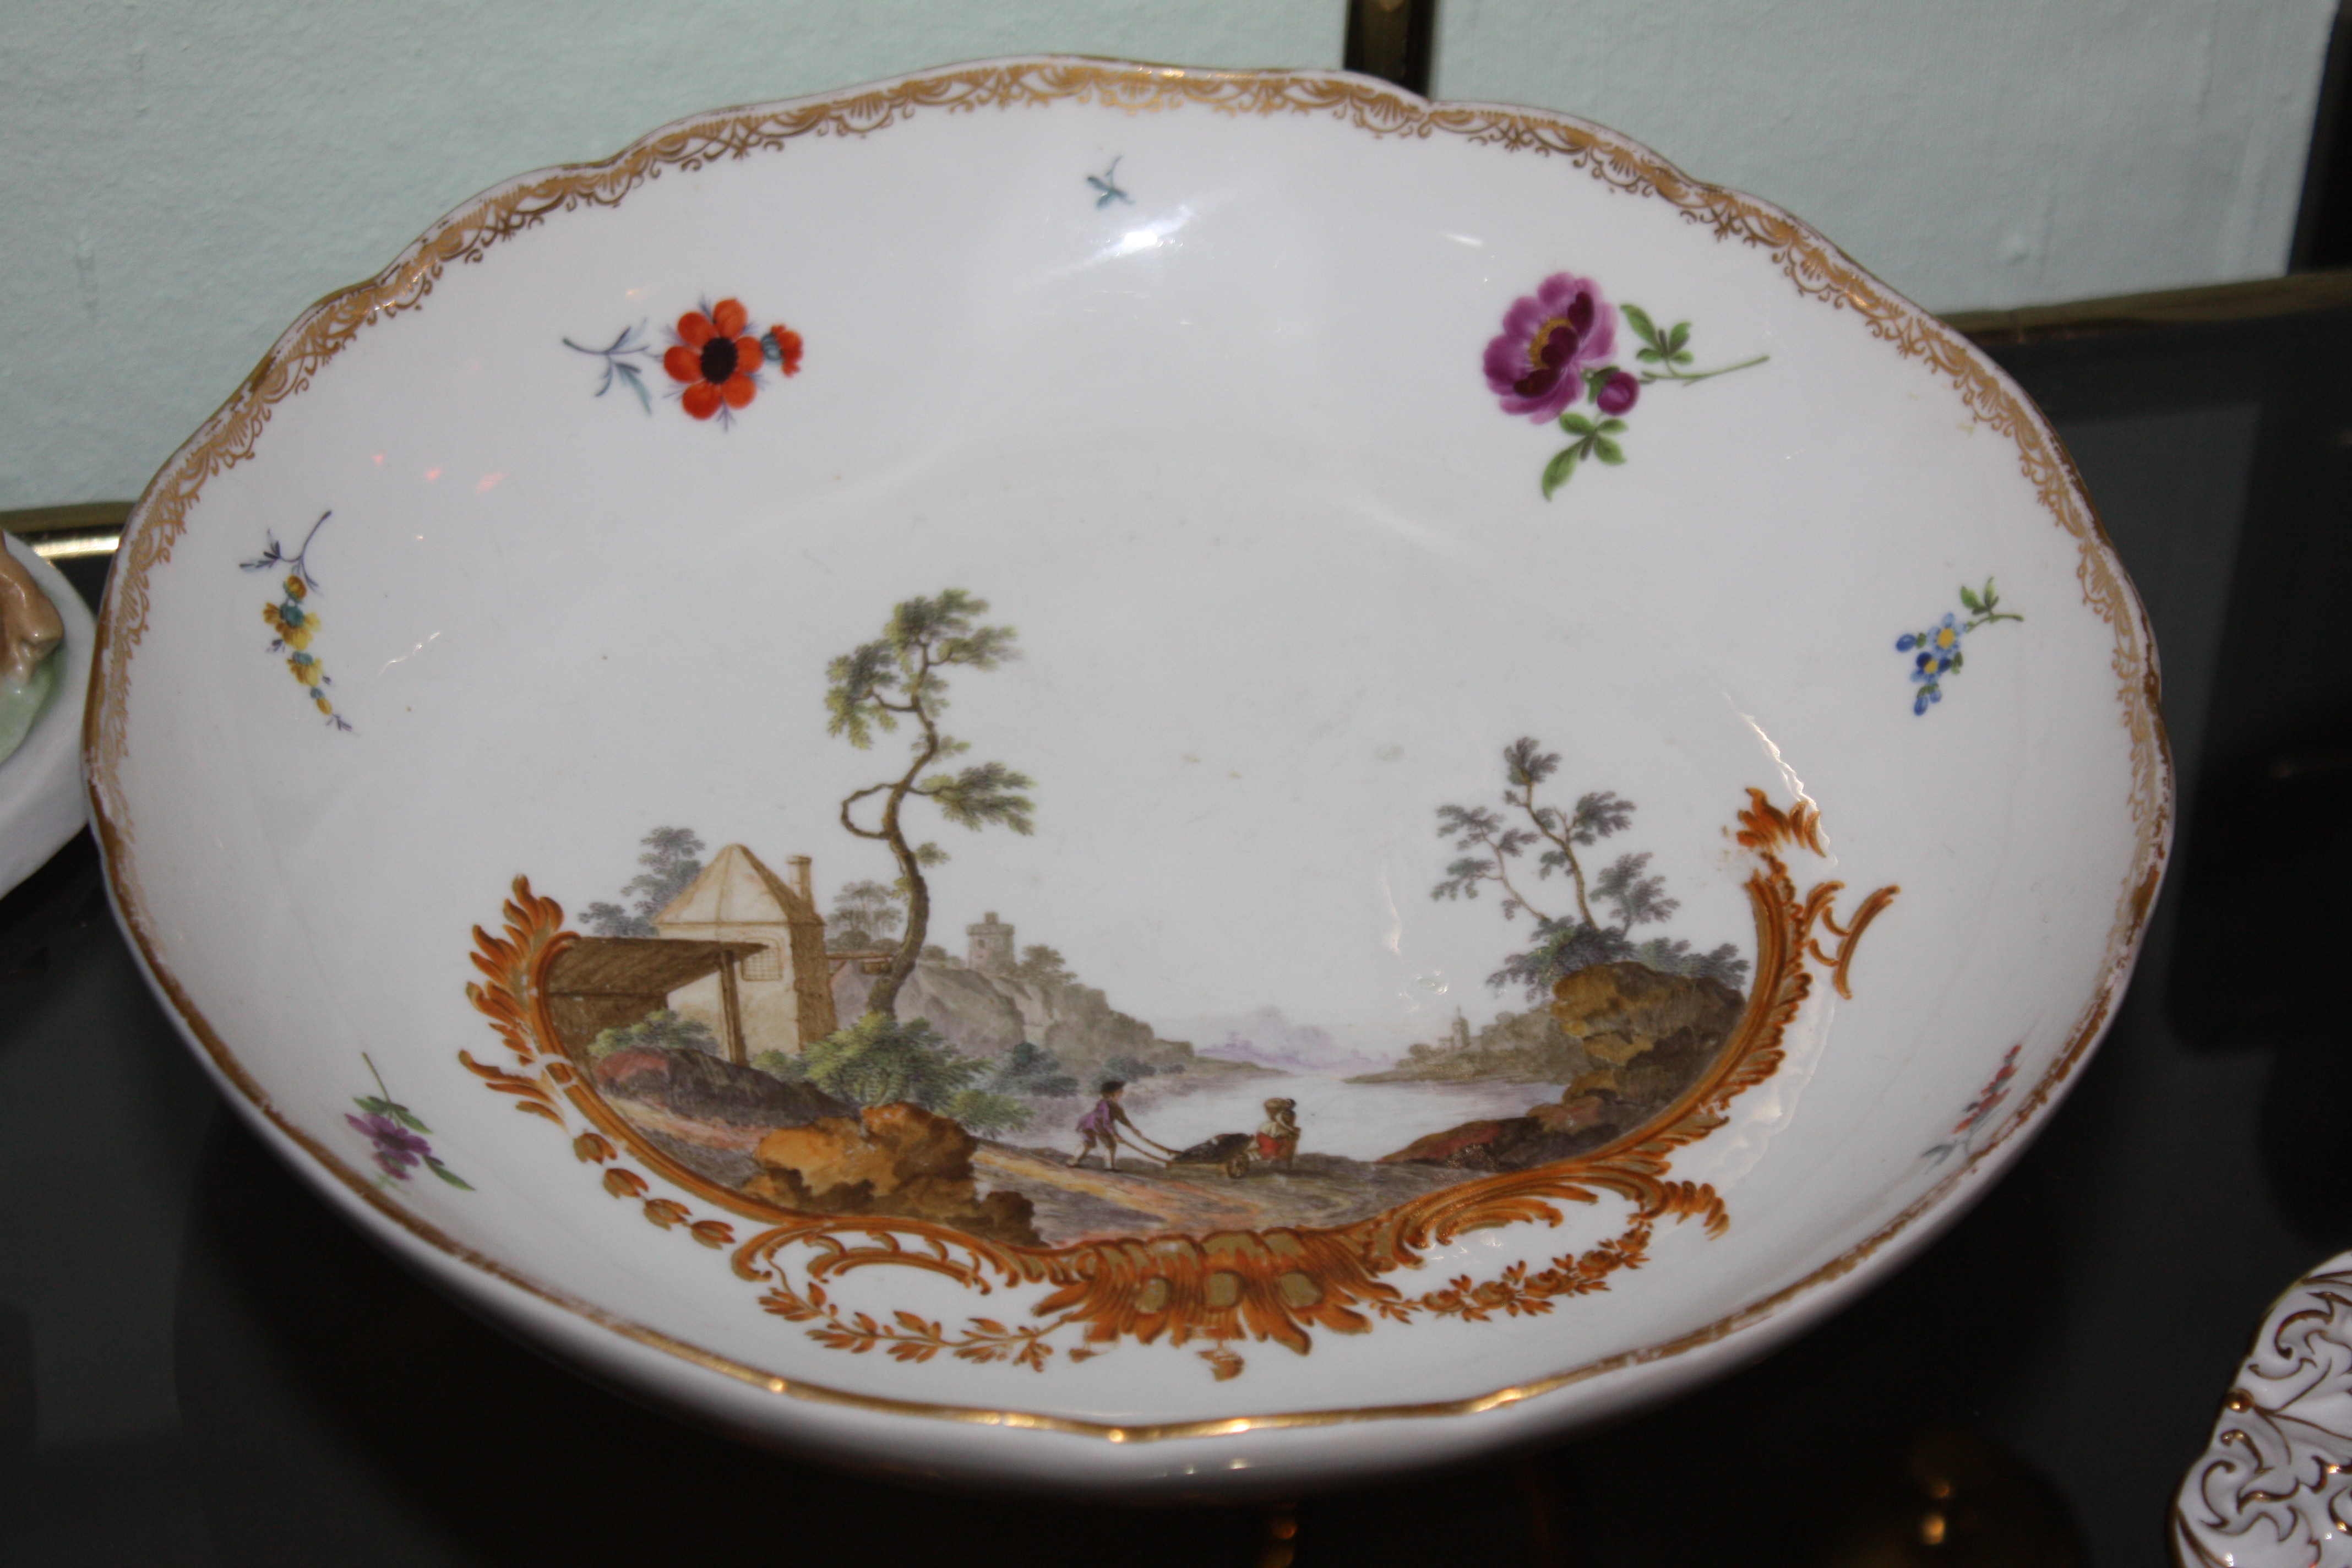 An 18th century Meissen plate with hand-painted romantic scene